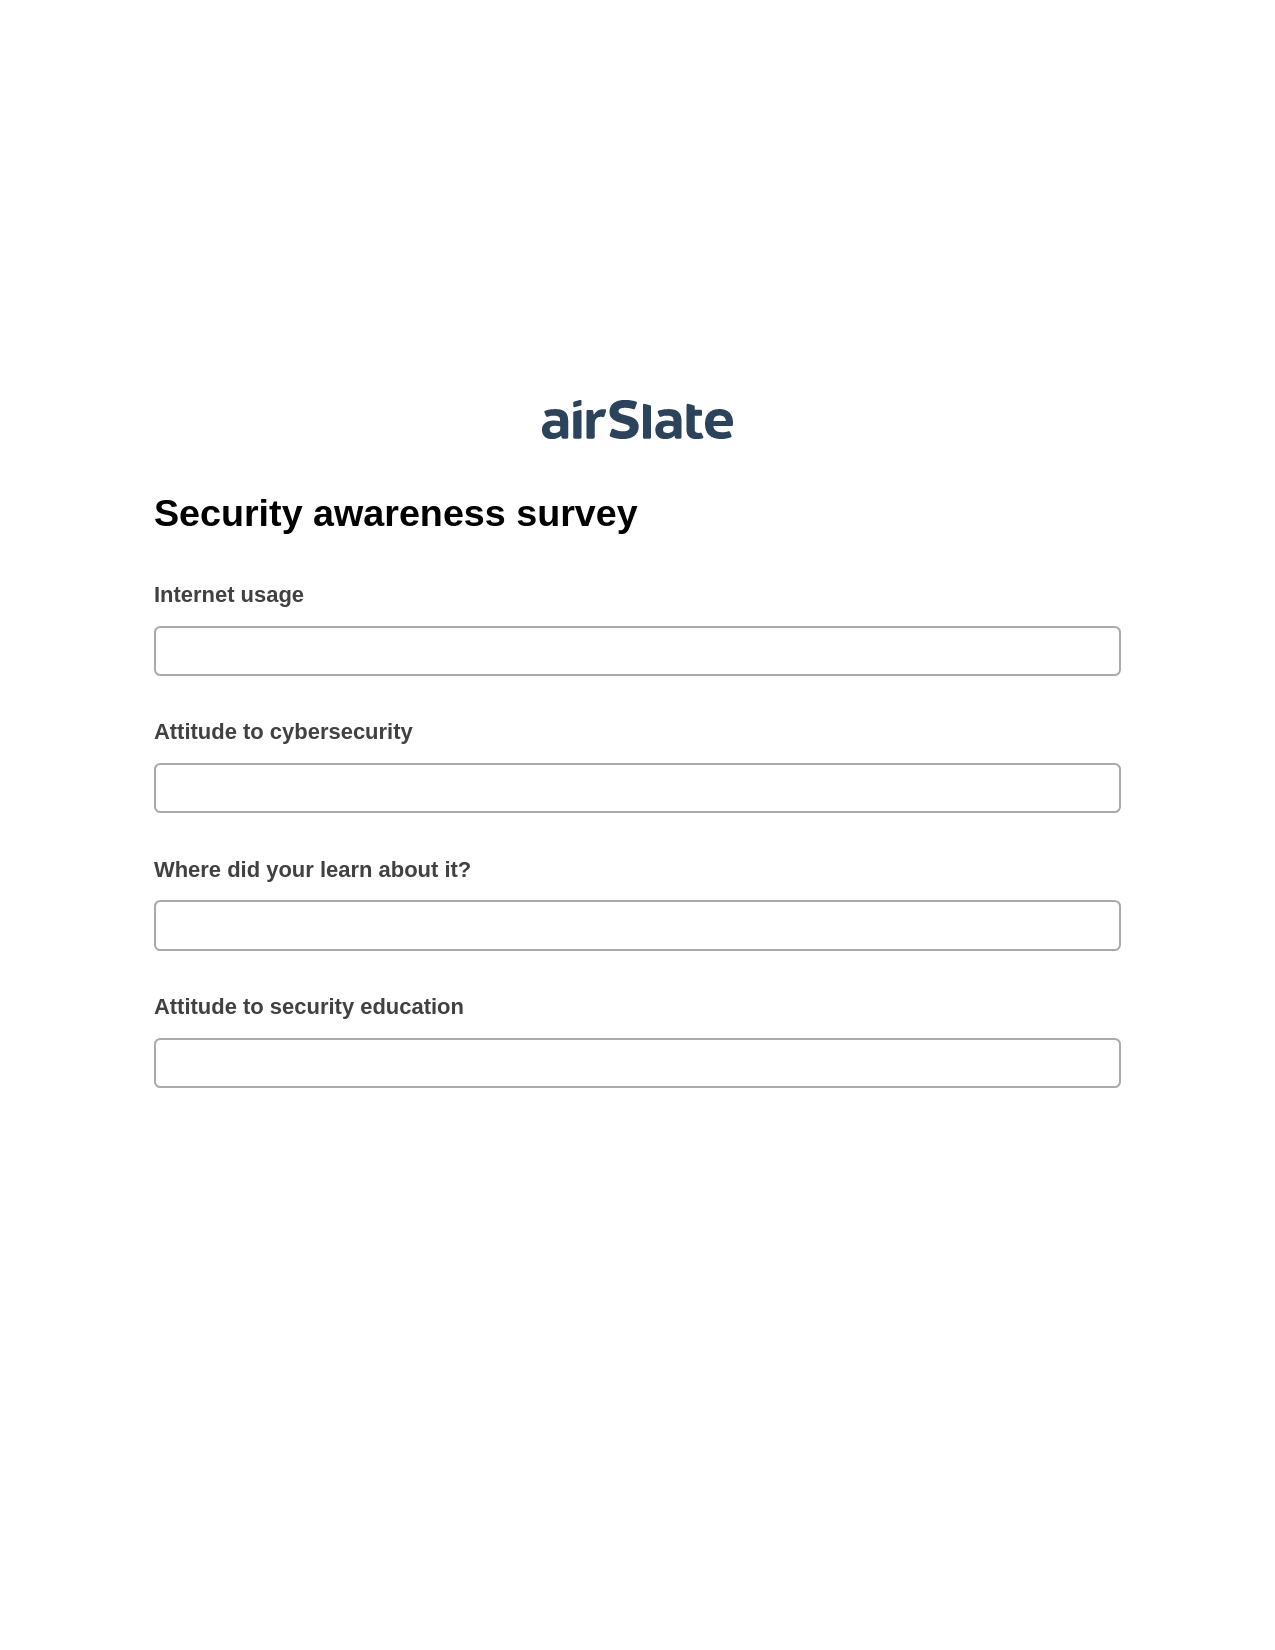 Multirole Security awareness survey Pre-fill from Salesforce Record Bot, Slack Notification Bot, Export to Salesforce Bot